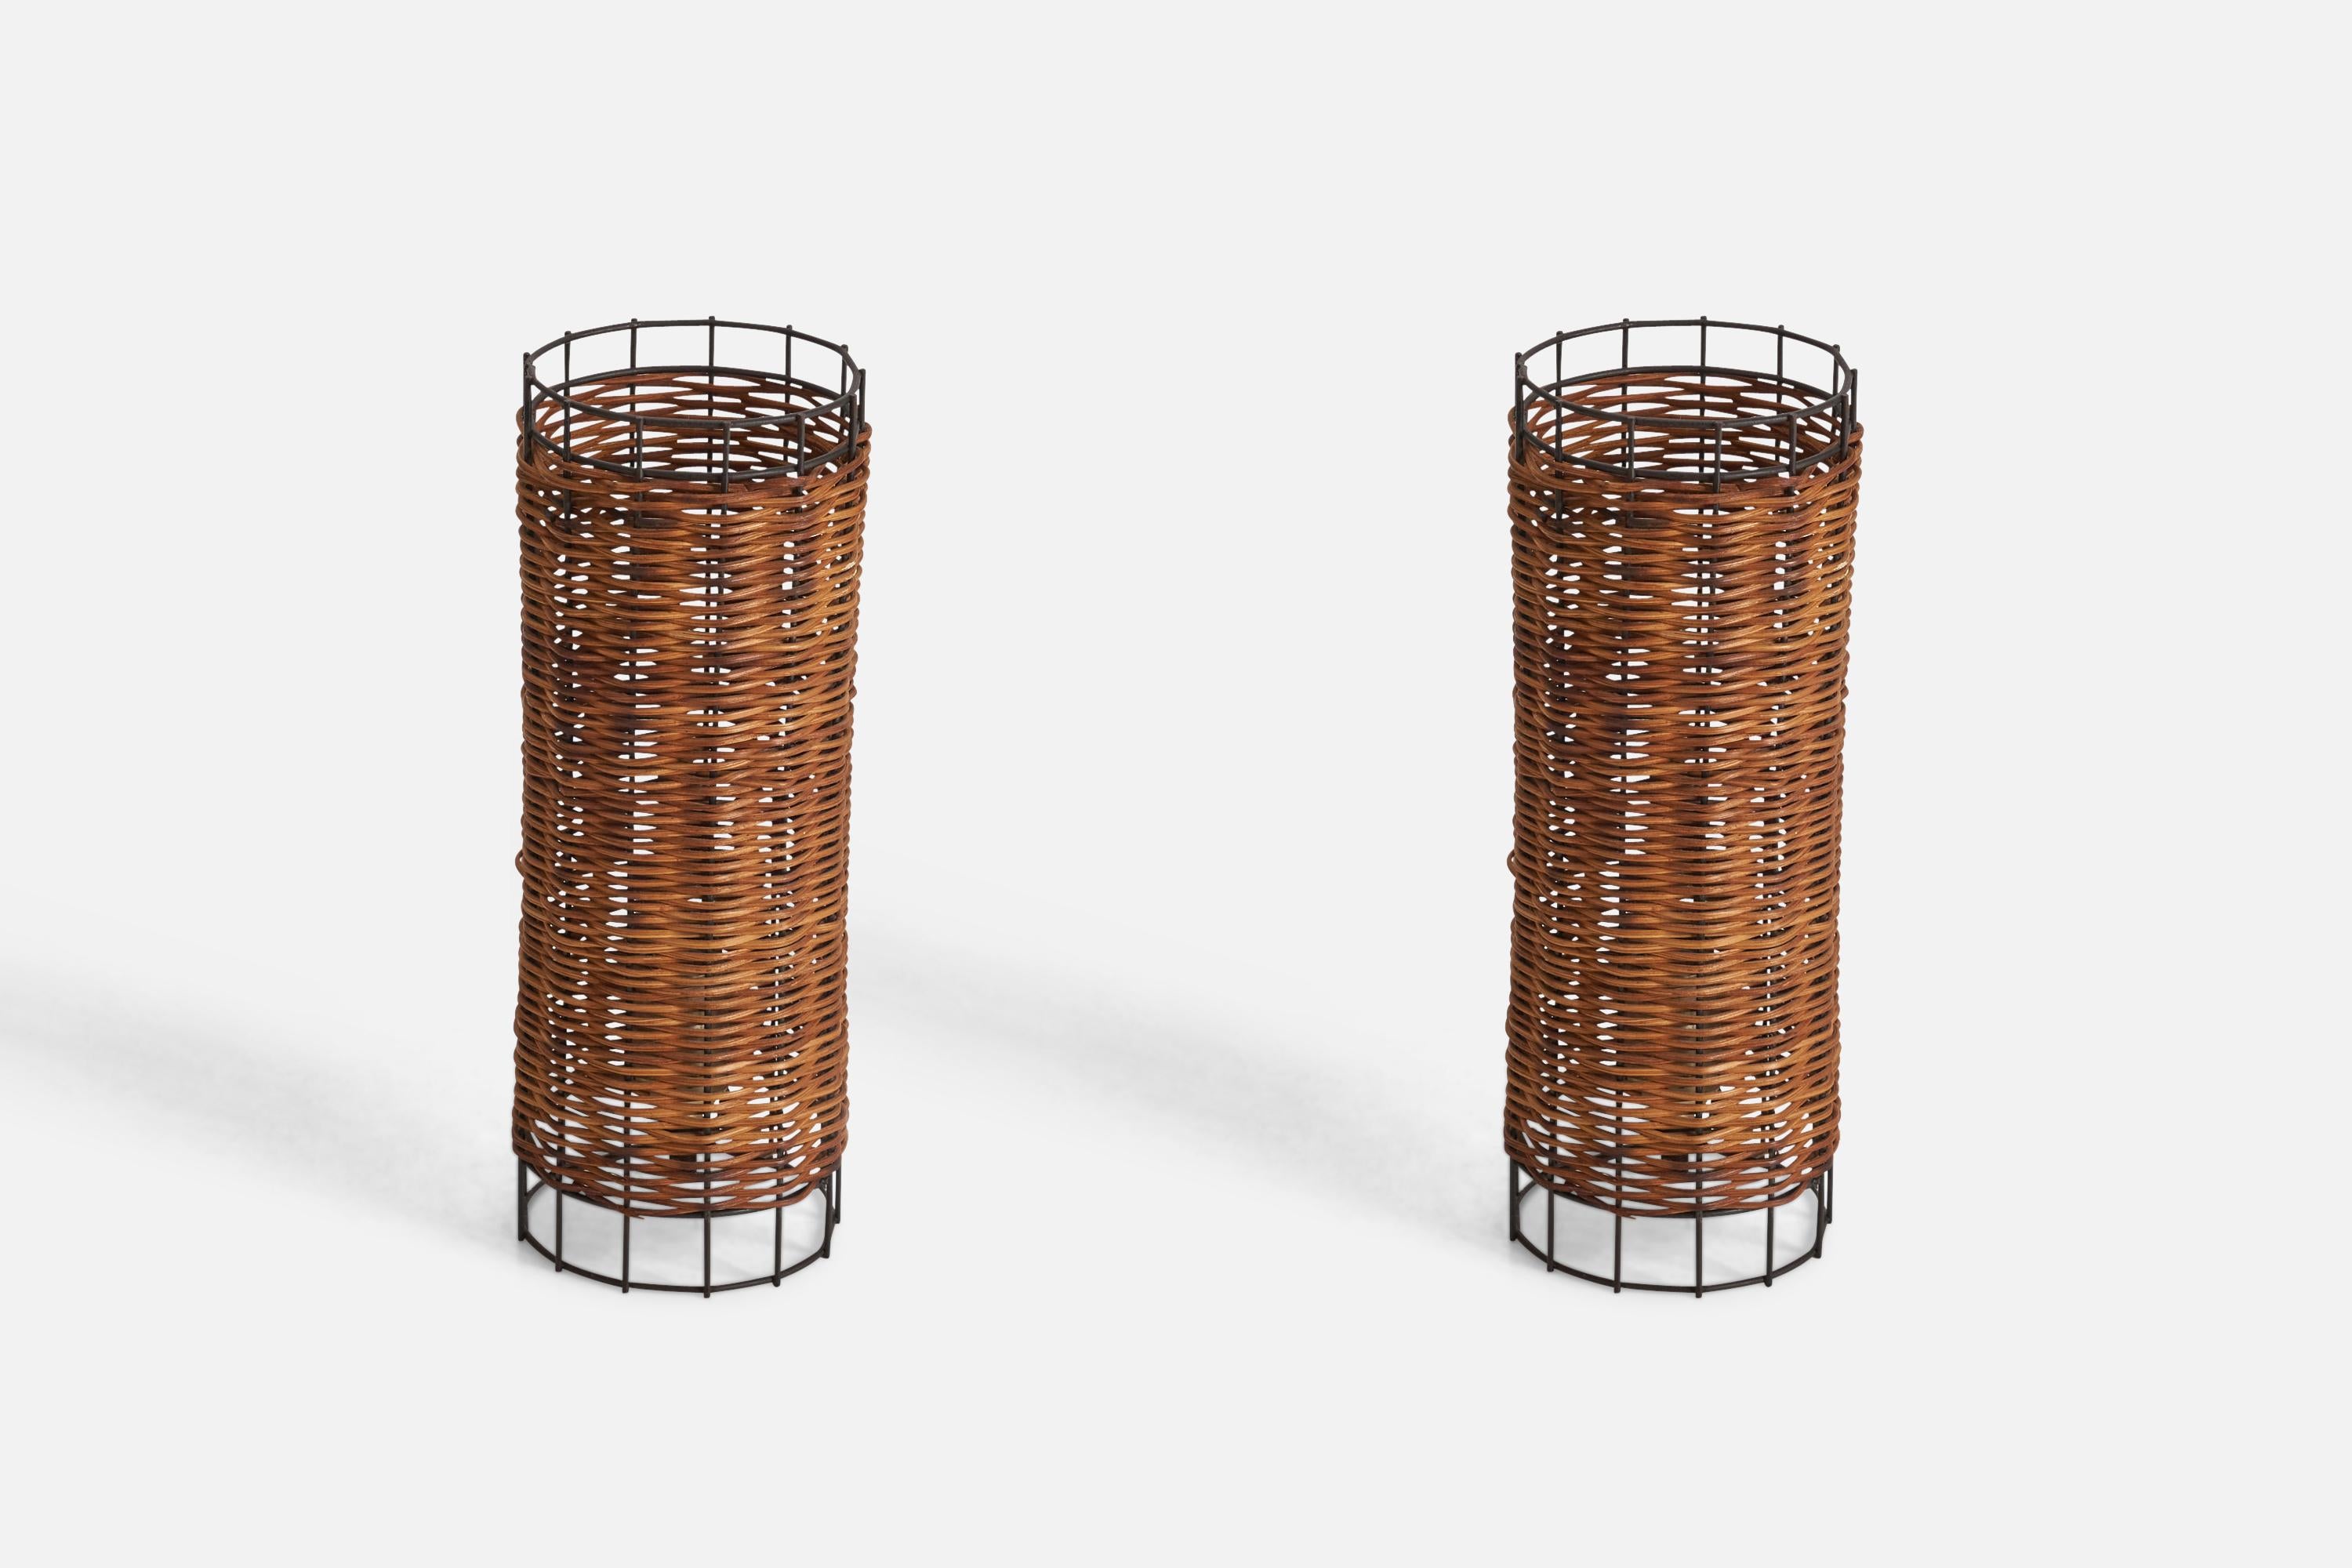 Mid-Century Modern American Designer, Table Lamps, Lacquered Metal, Rattan, USA, 1950s For Sale